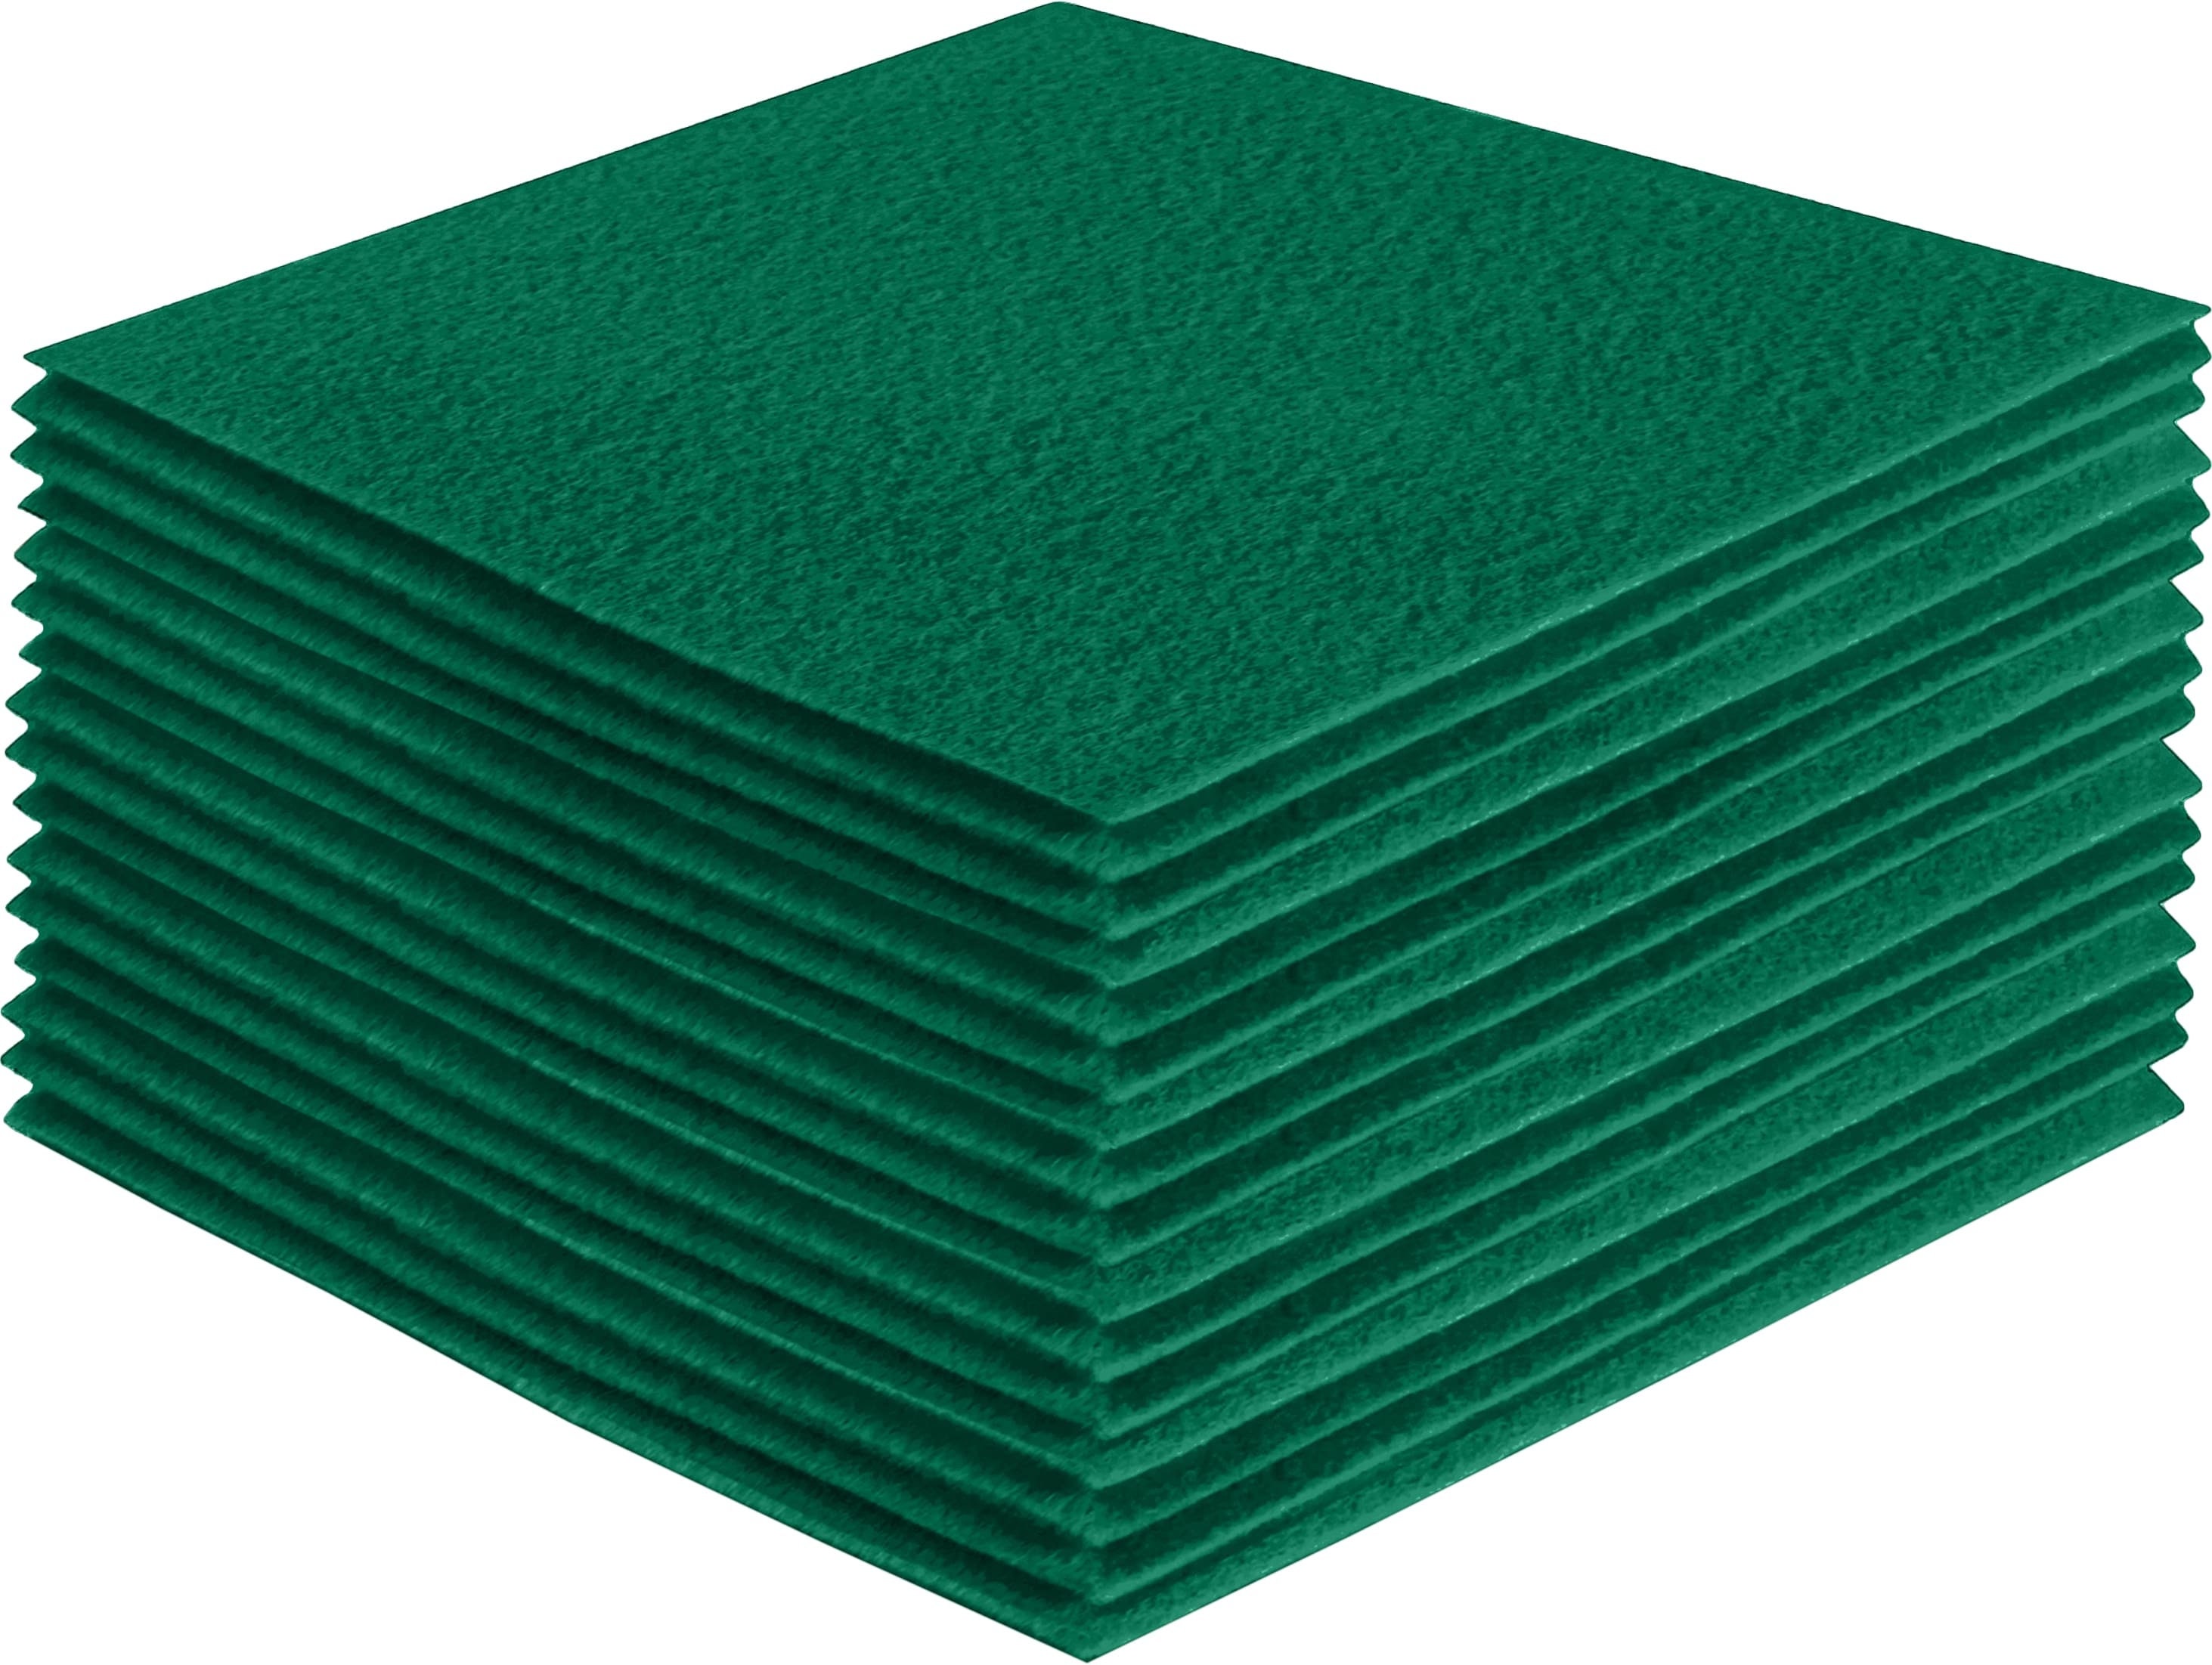 FabricLA Acrylic Felt Fabric - 72 Inch Wide 1.6mm Thick Felt by The Yard -  Use Soft Felt Sheets for Sewing, Cushion, and Padding, DIY Arts & Crafts (9  Yards, Green)